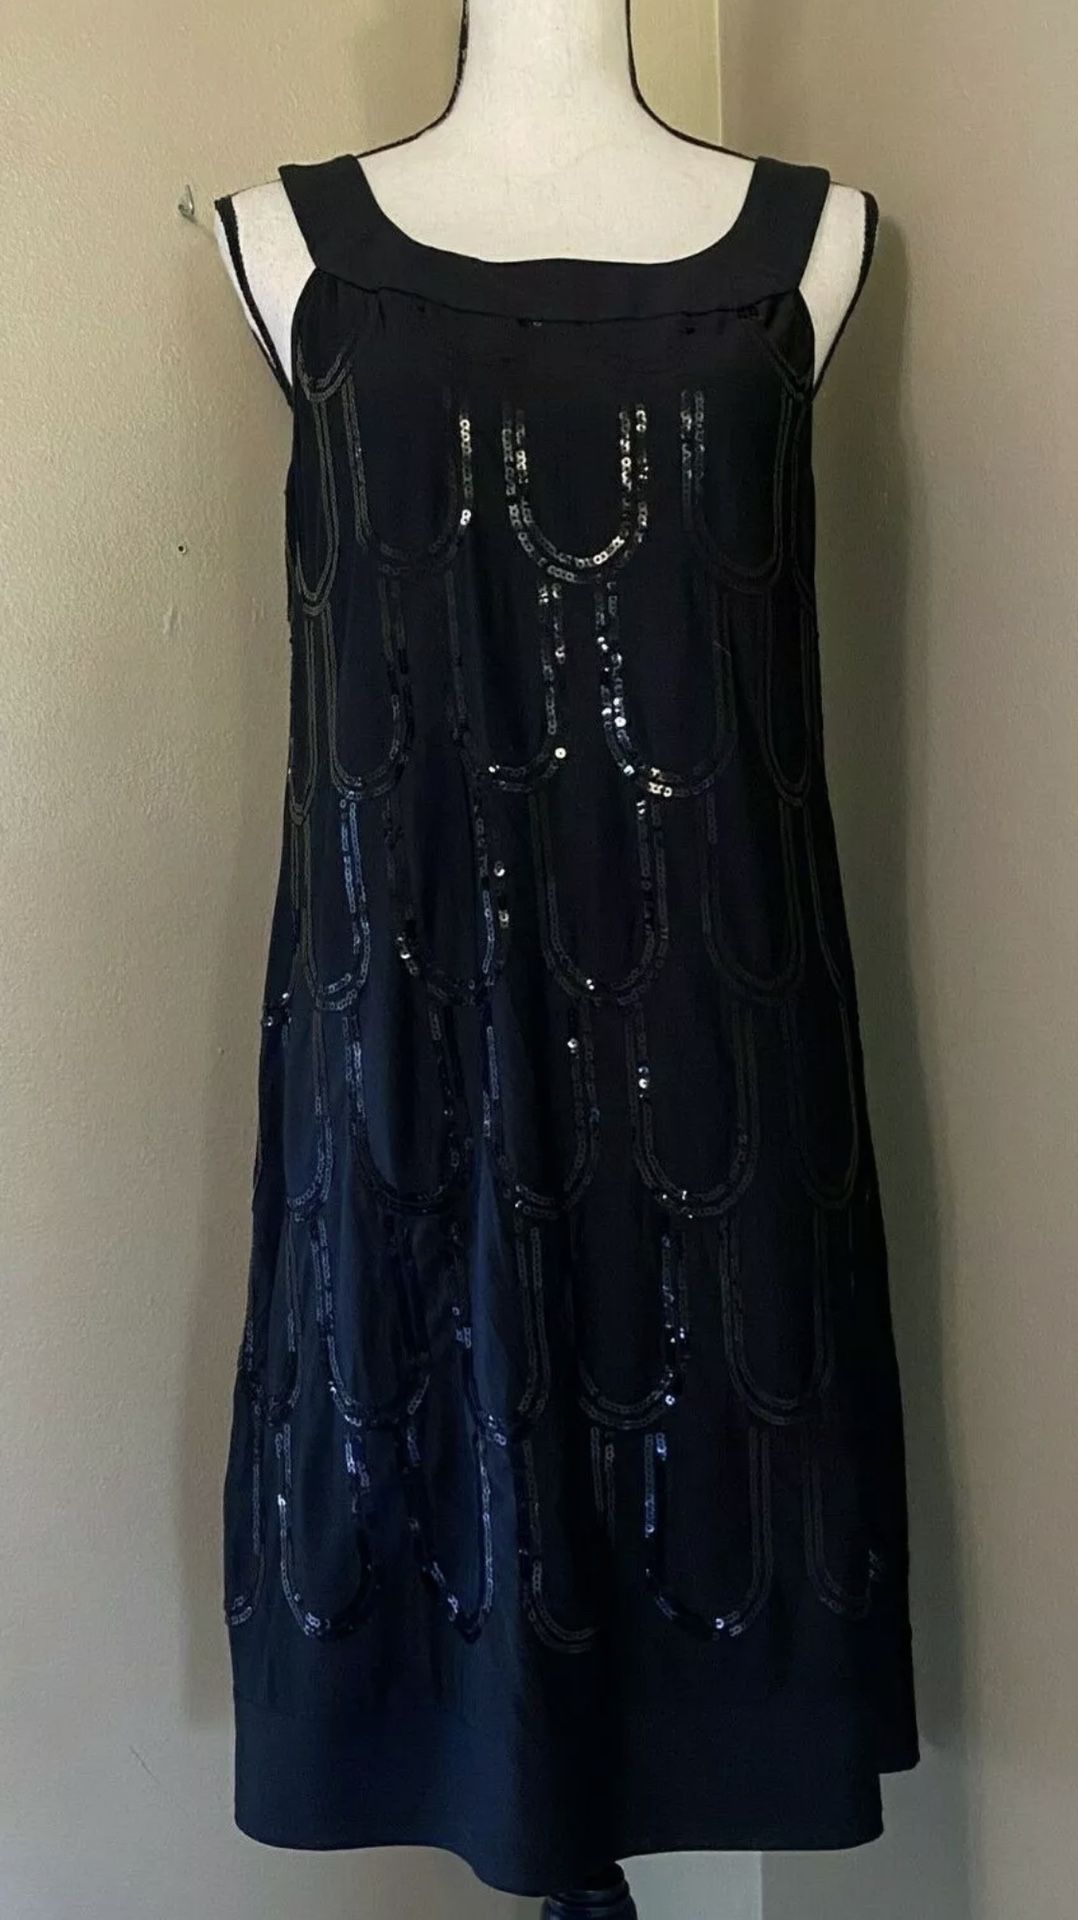 Connected Apparel Black Sleeveless Sequin Shift Party Flapper Dress Women's 10